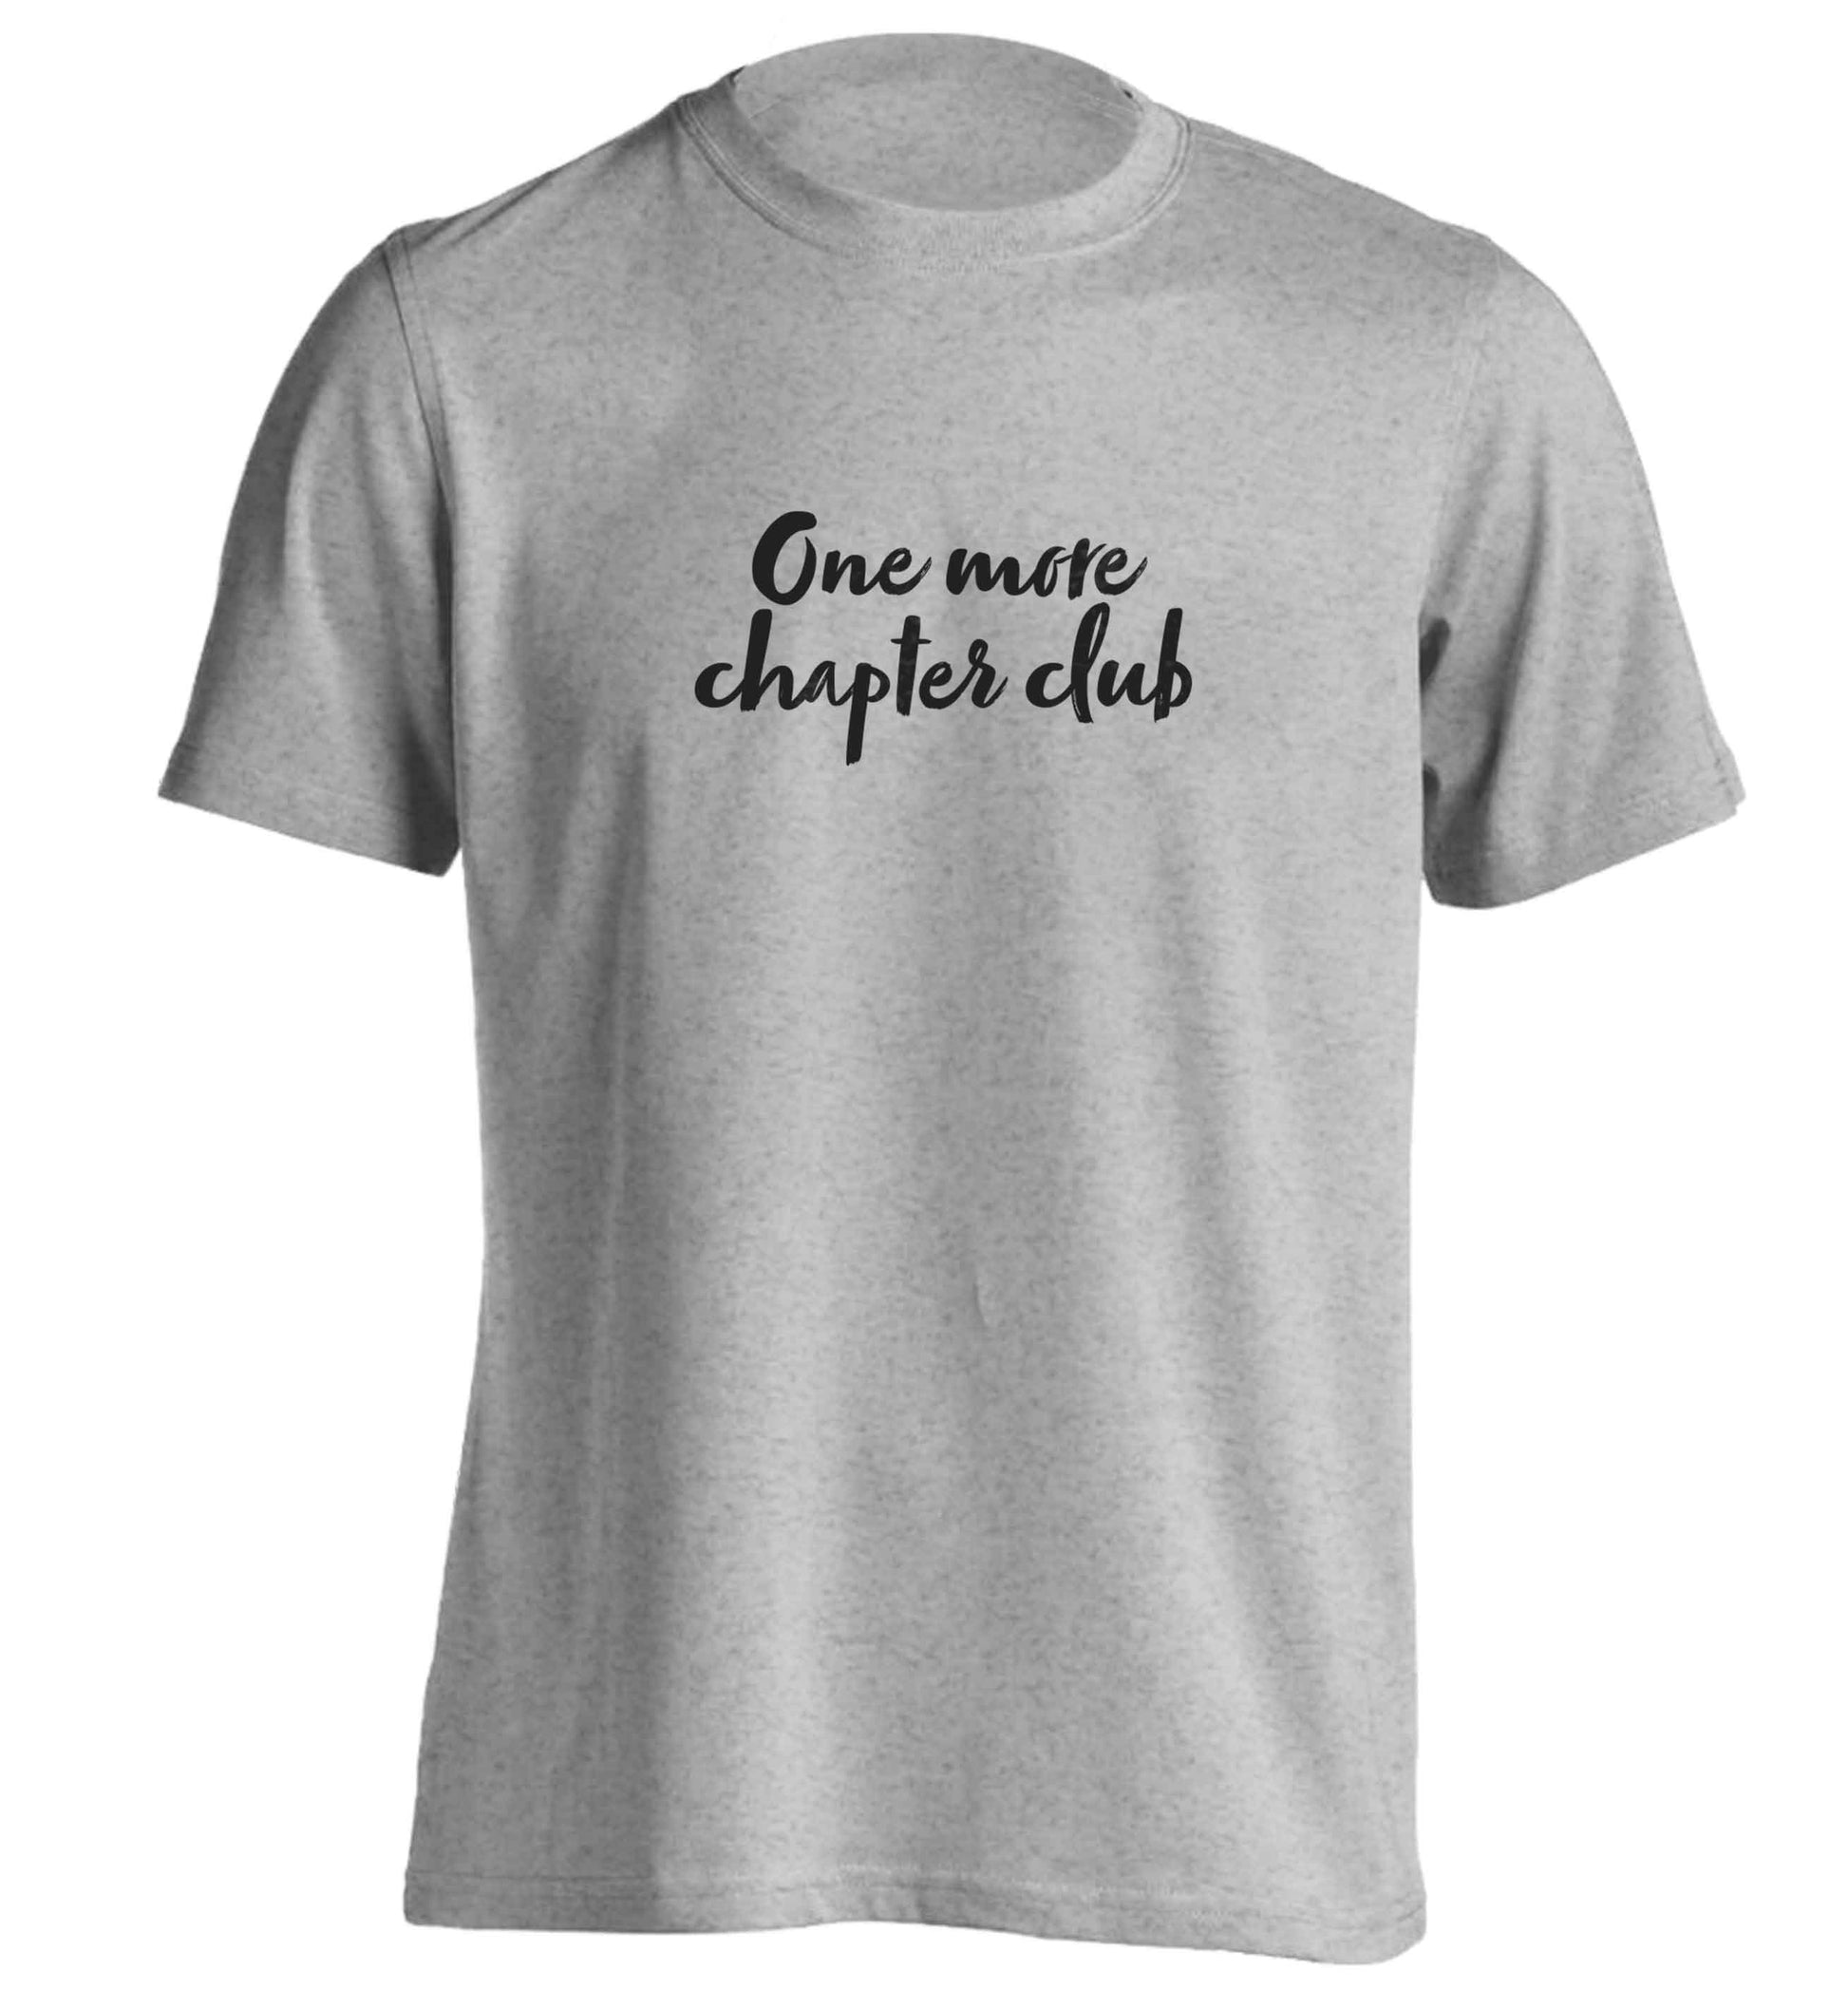 One more chapter club Kit adults unisex grey Tshirt 2XL